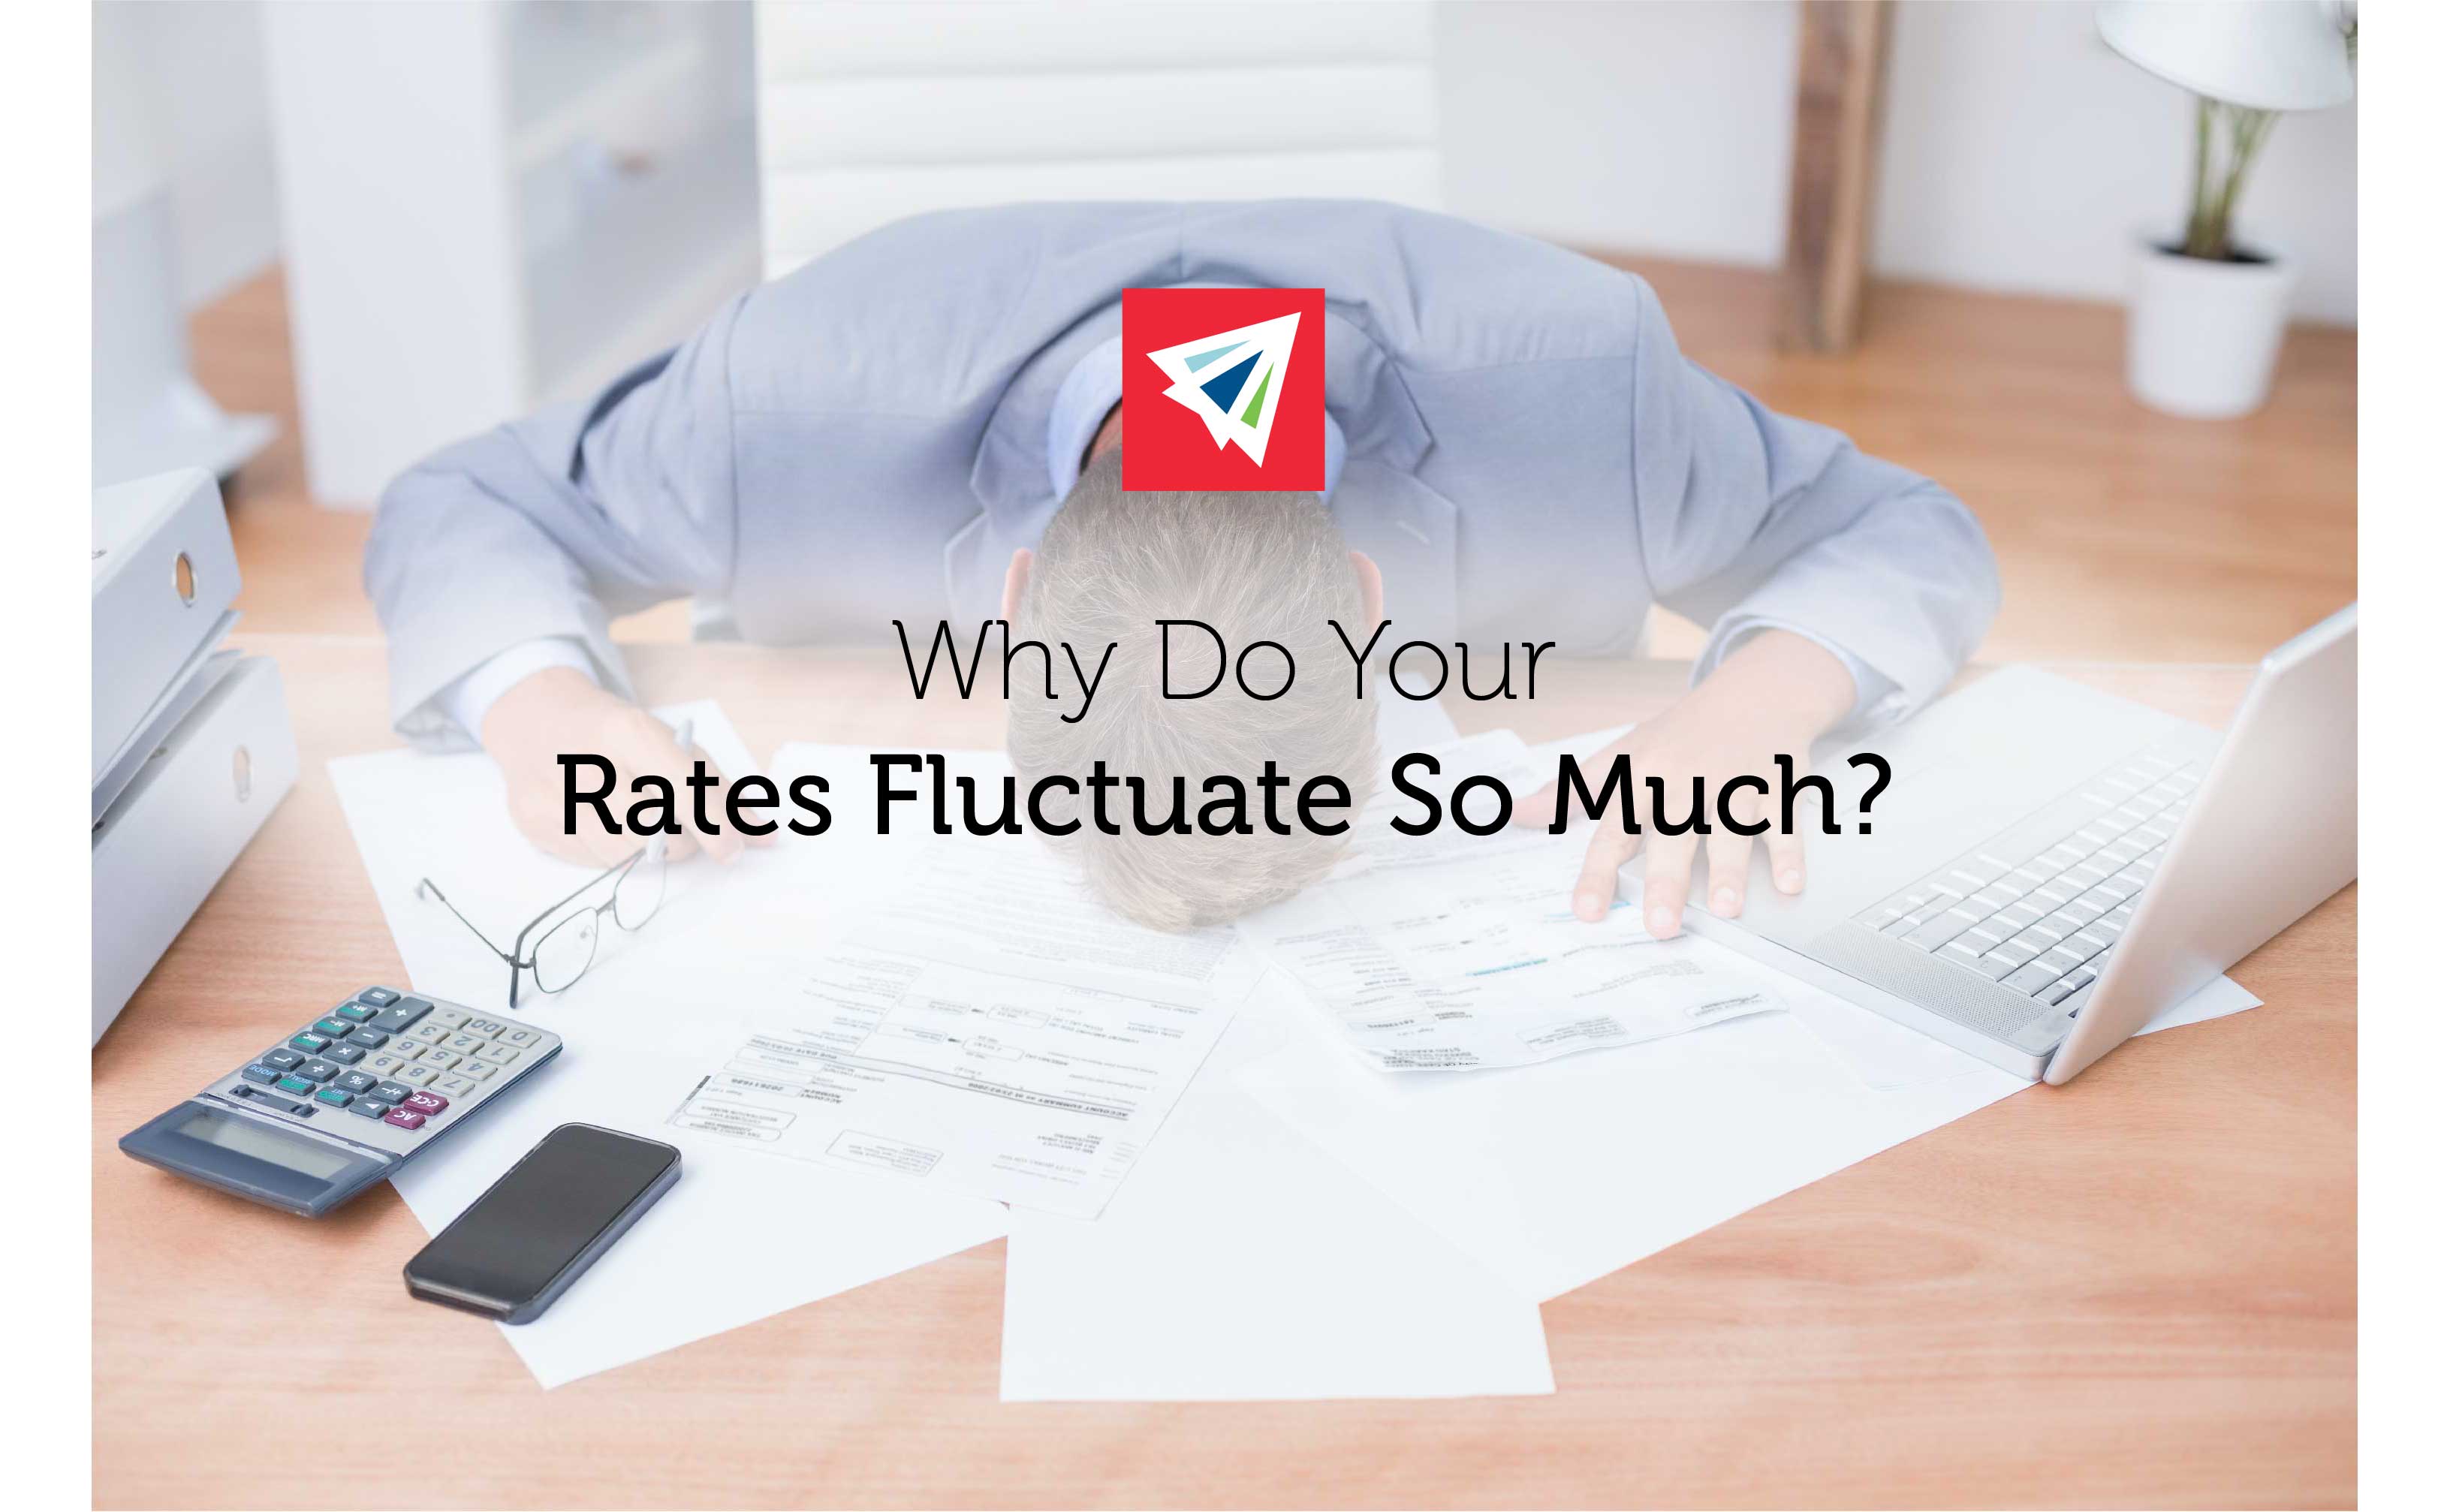 Why Do My Rates Fluctuate So Much?